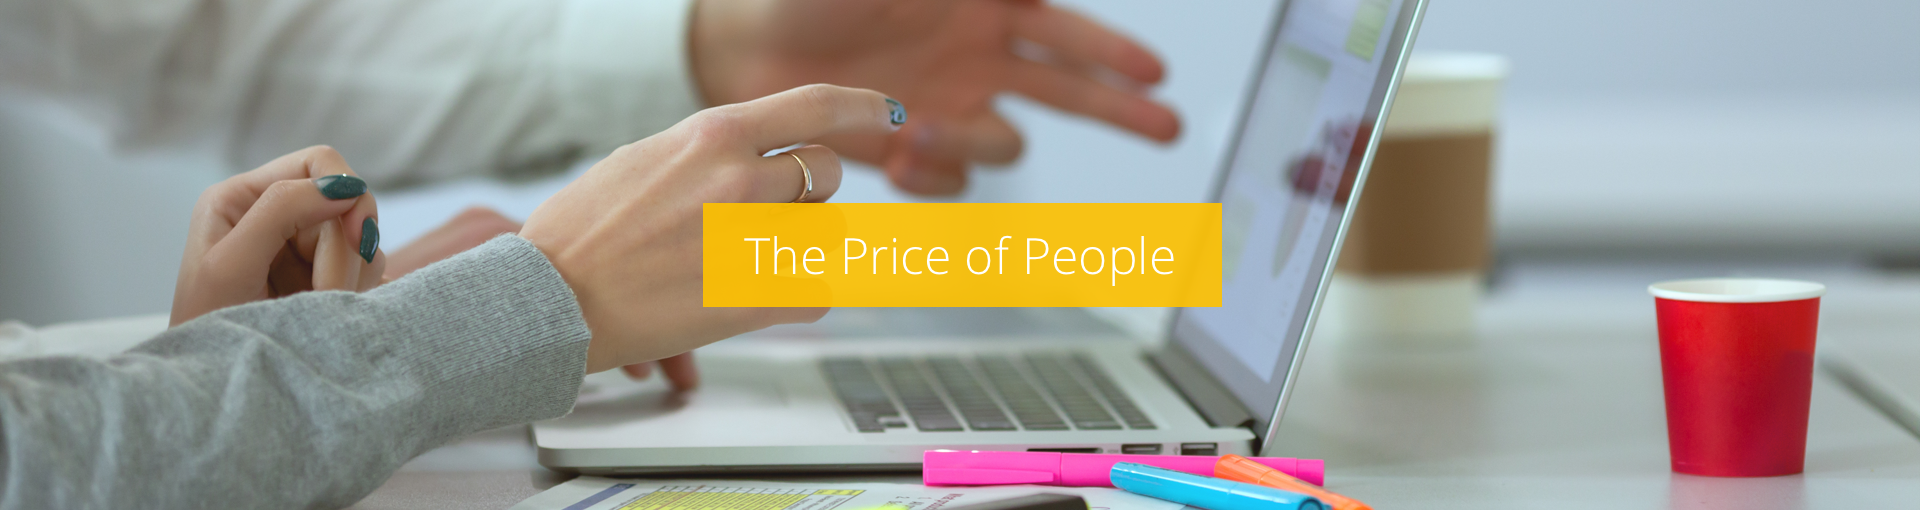 The Price of People Featured Image